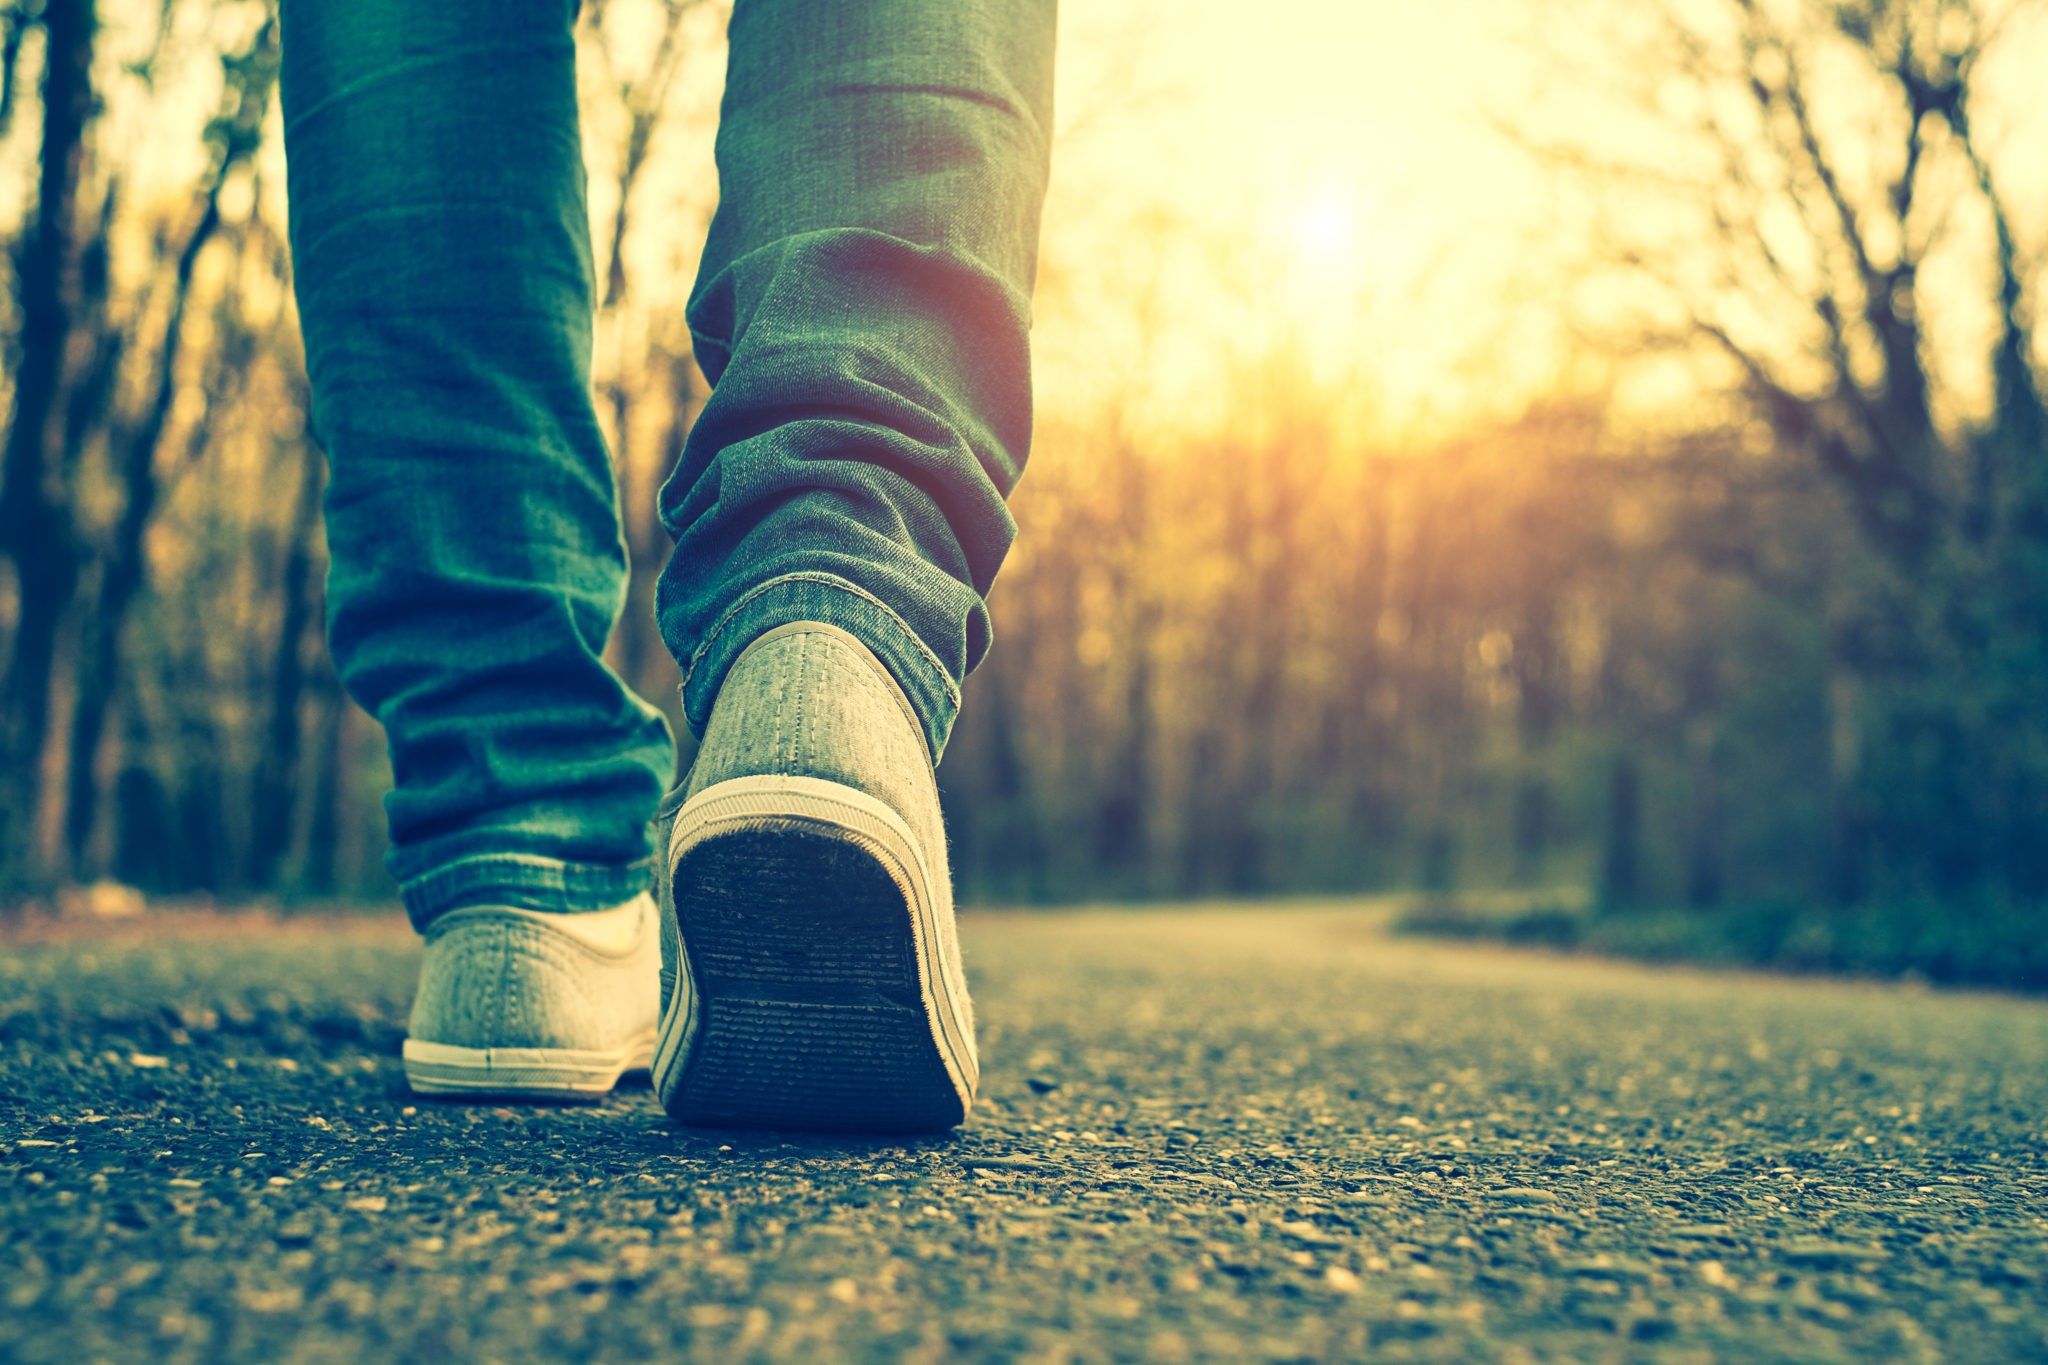 Stop reading about improving your health and take action: Go for a walk right now